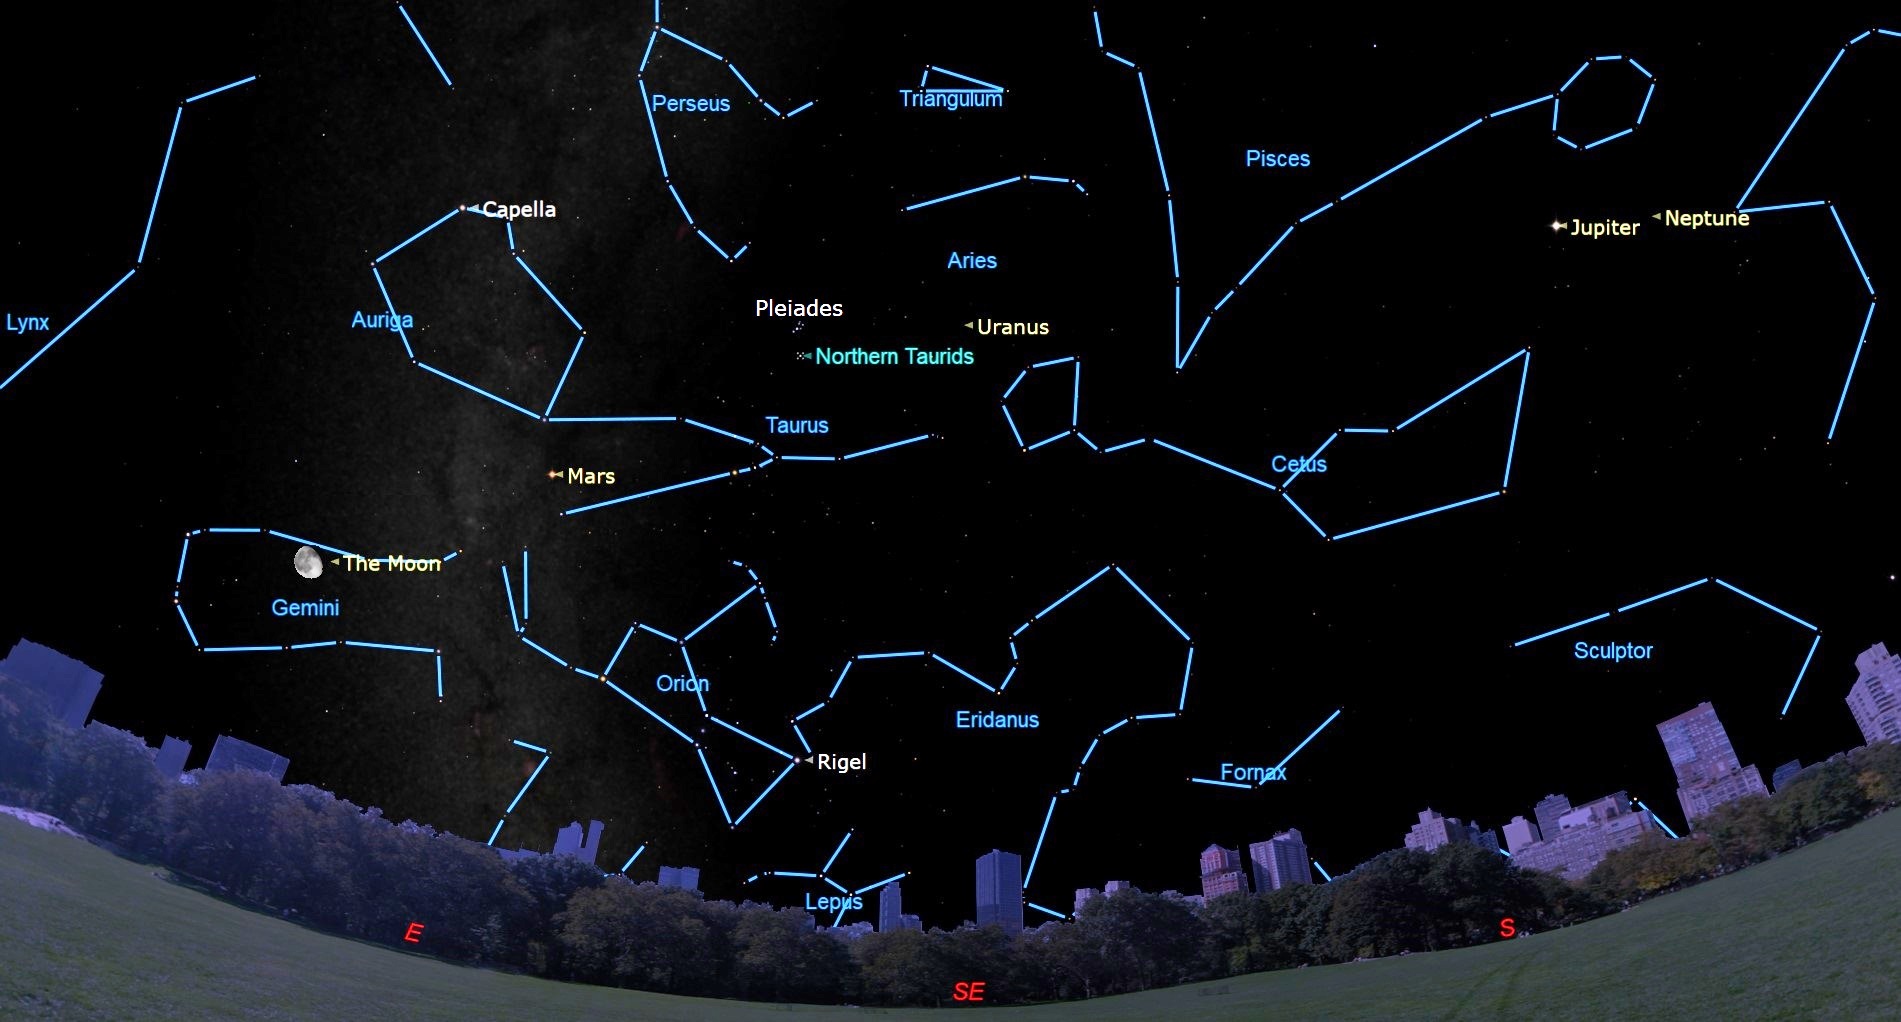 Image of the night sky on November 12 showing the constellation Taurus, from which the northern Taurids will originate.